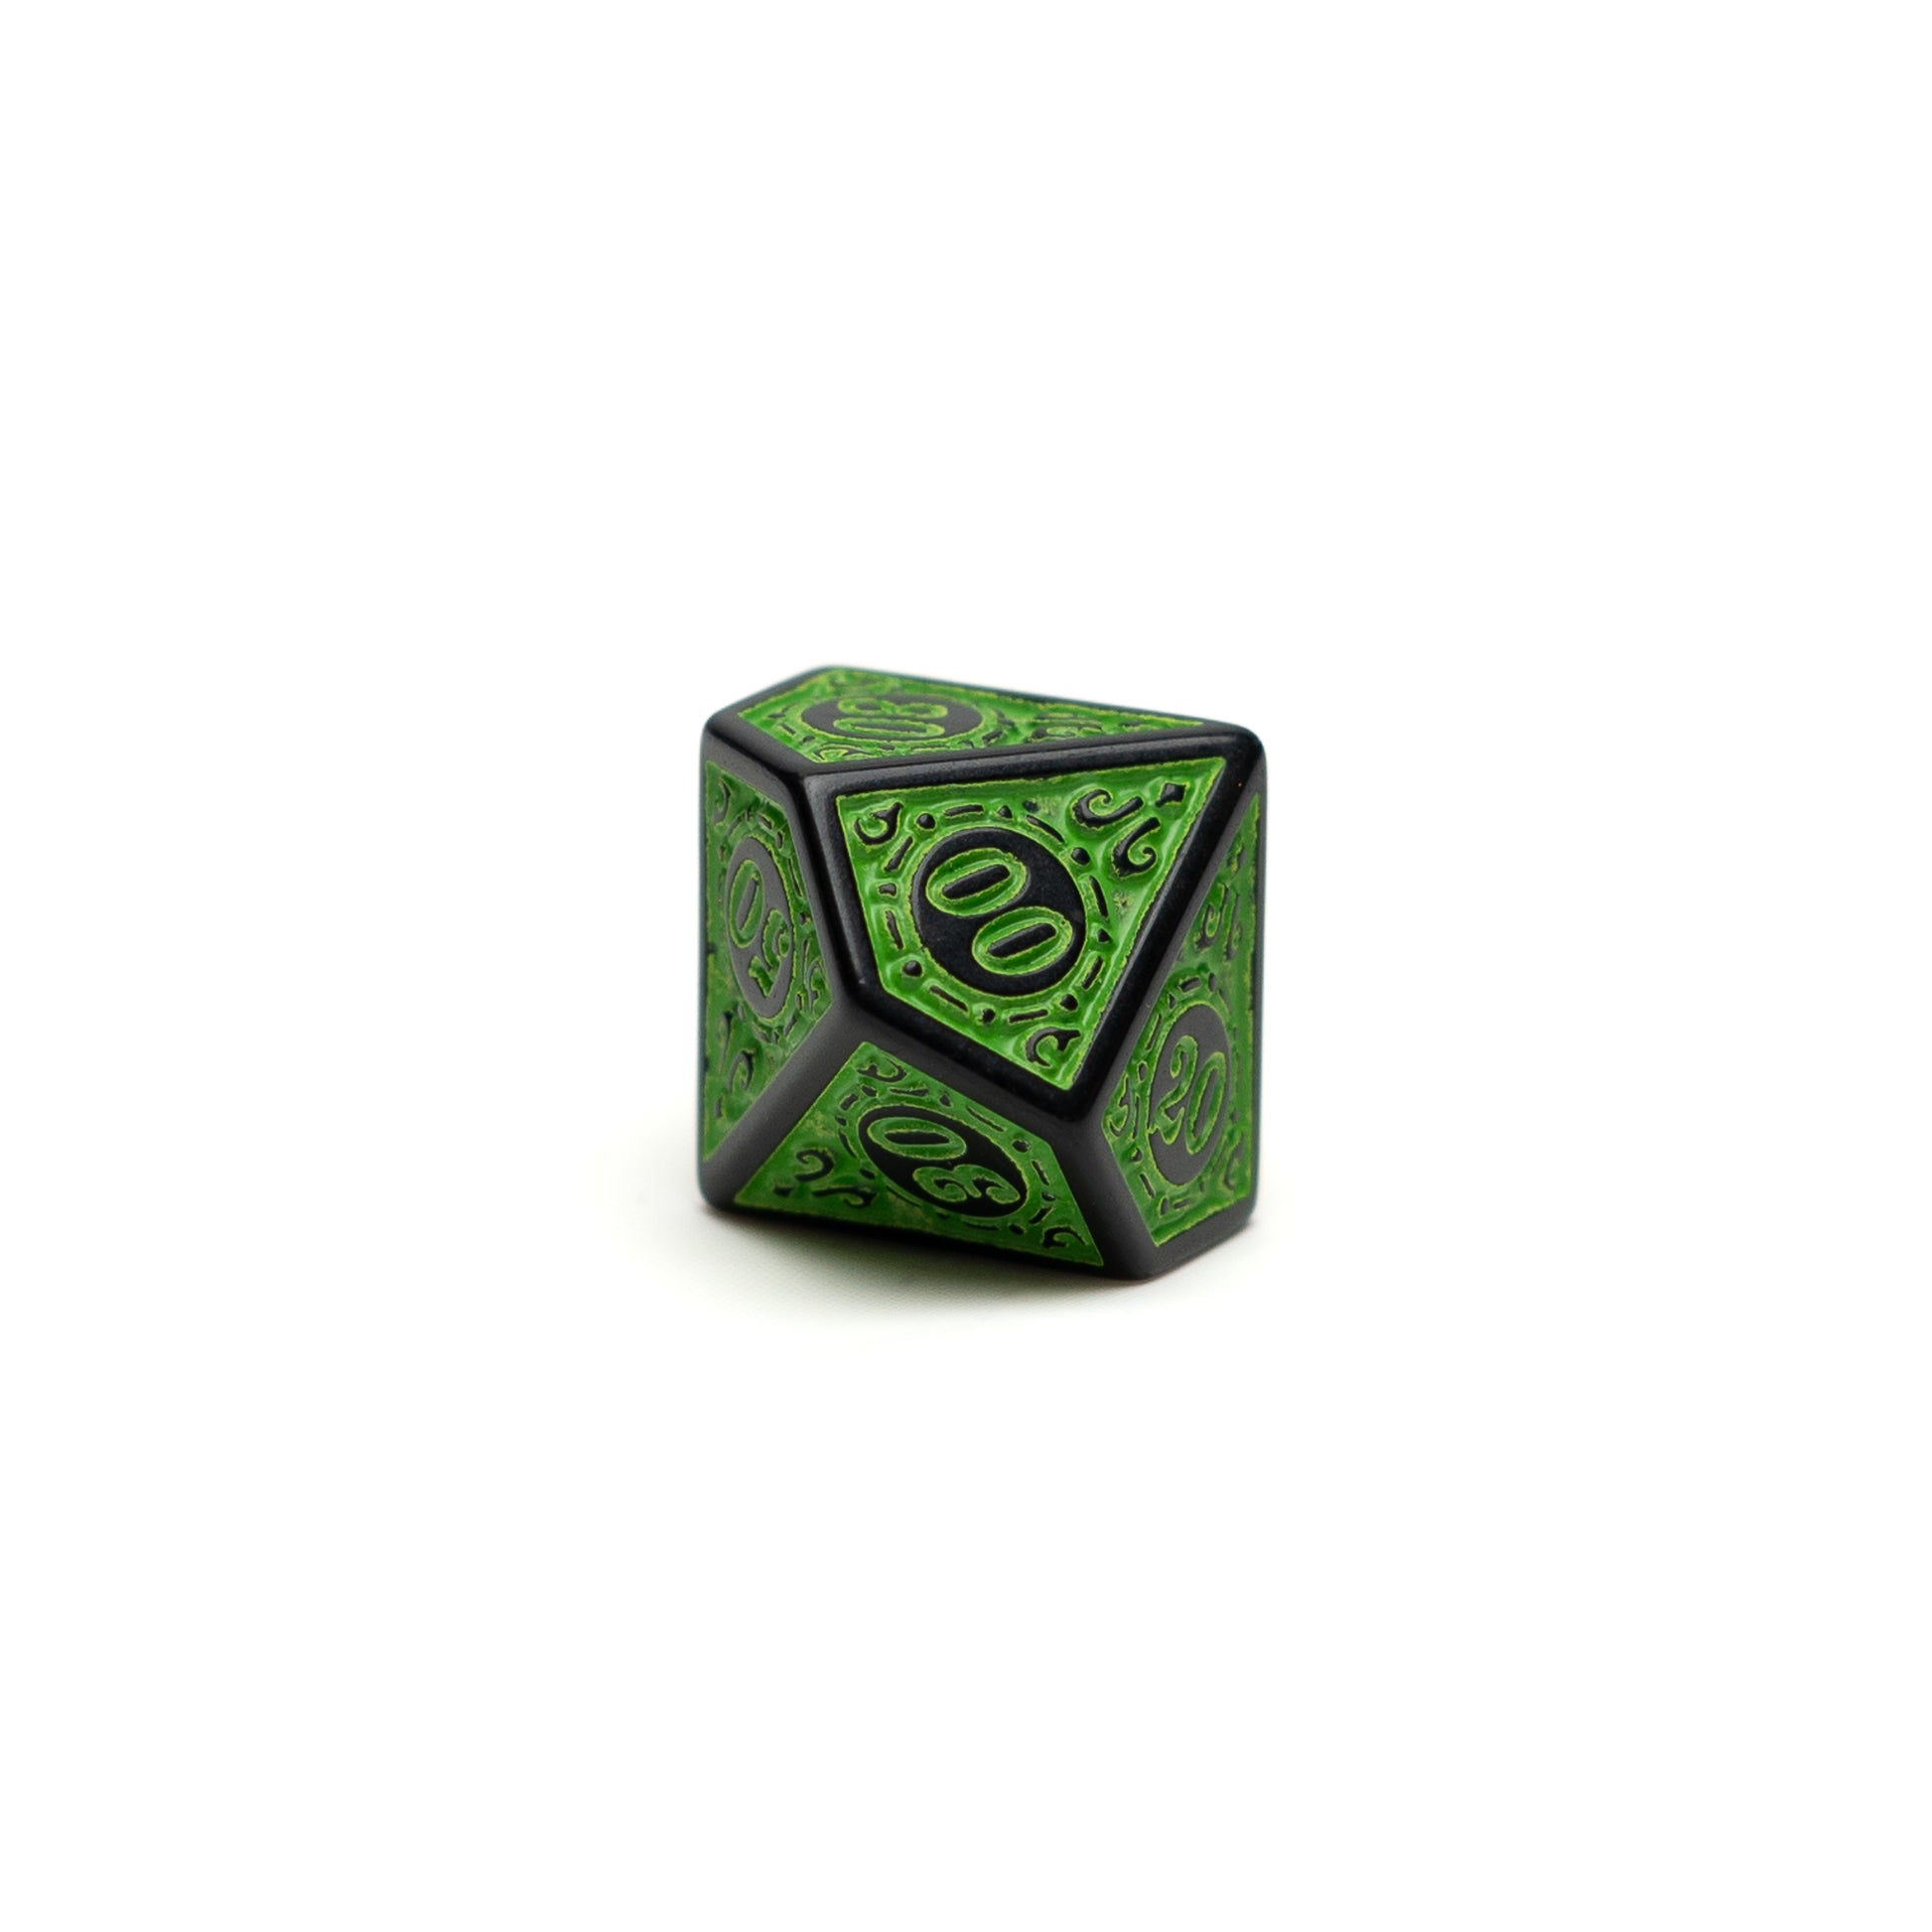 Roll Britannia Keth Frostiron Dungeons and Dragons D10 Percentile Dice with Green Military Aesthetic